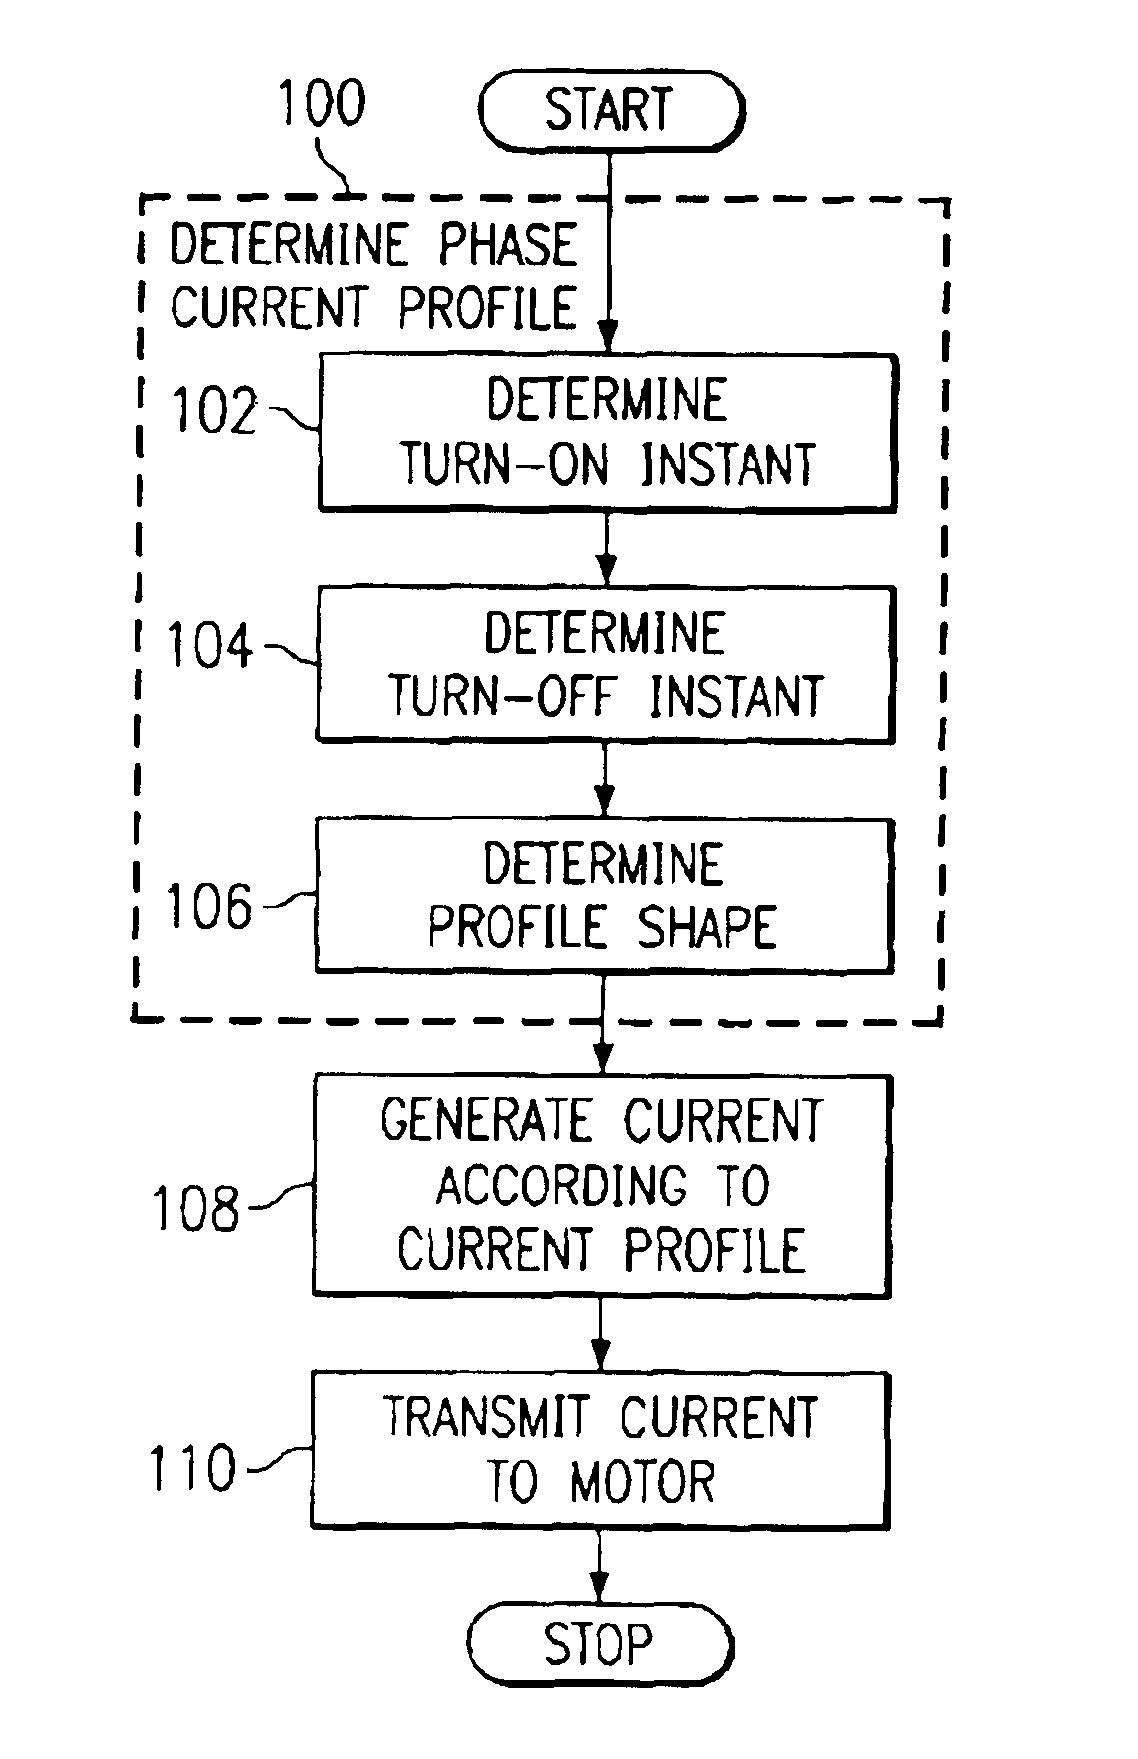 Method and apparatus for reducing noise and vibration in switched reluctance motor drives